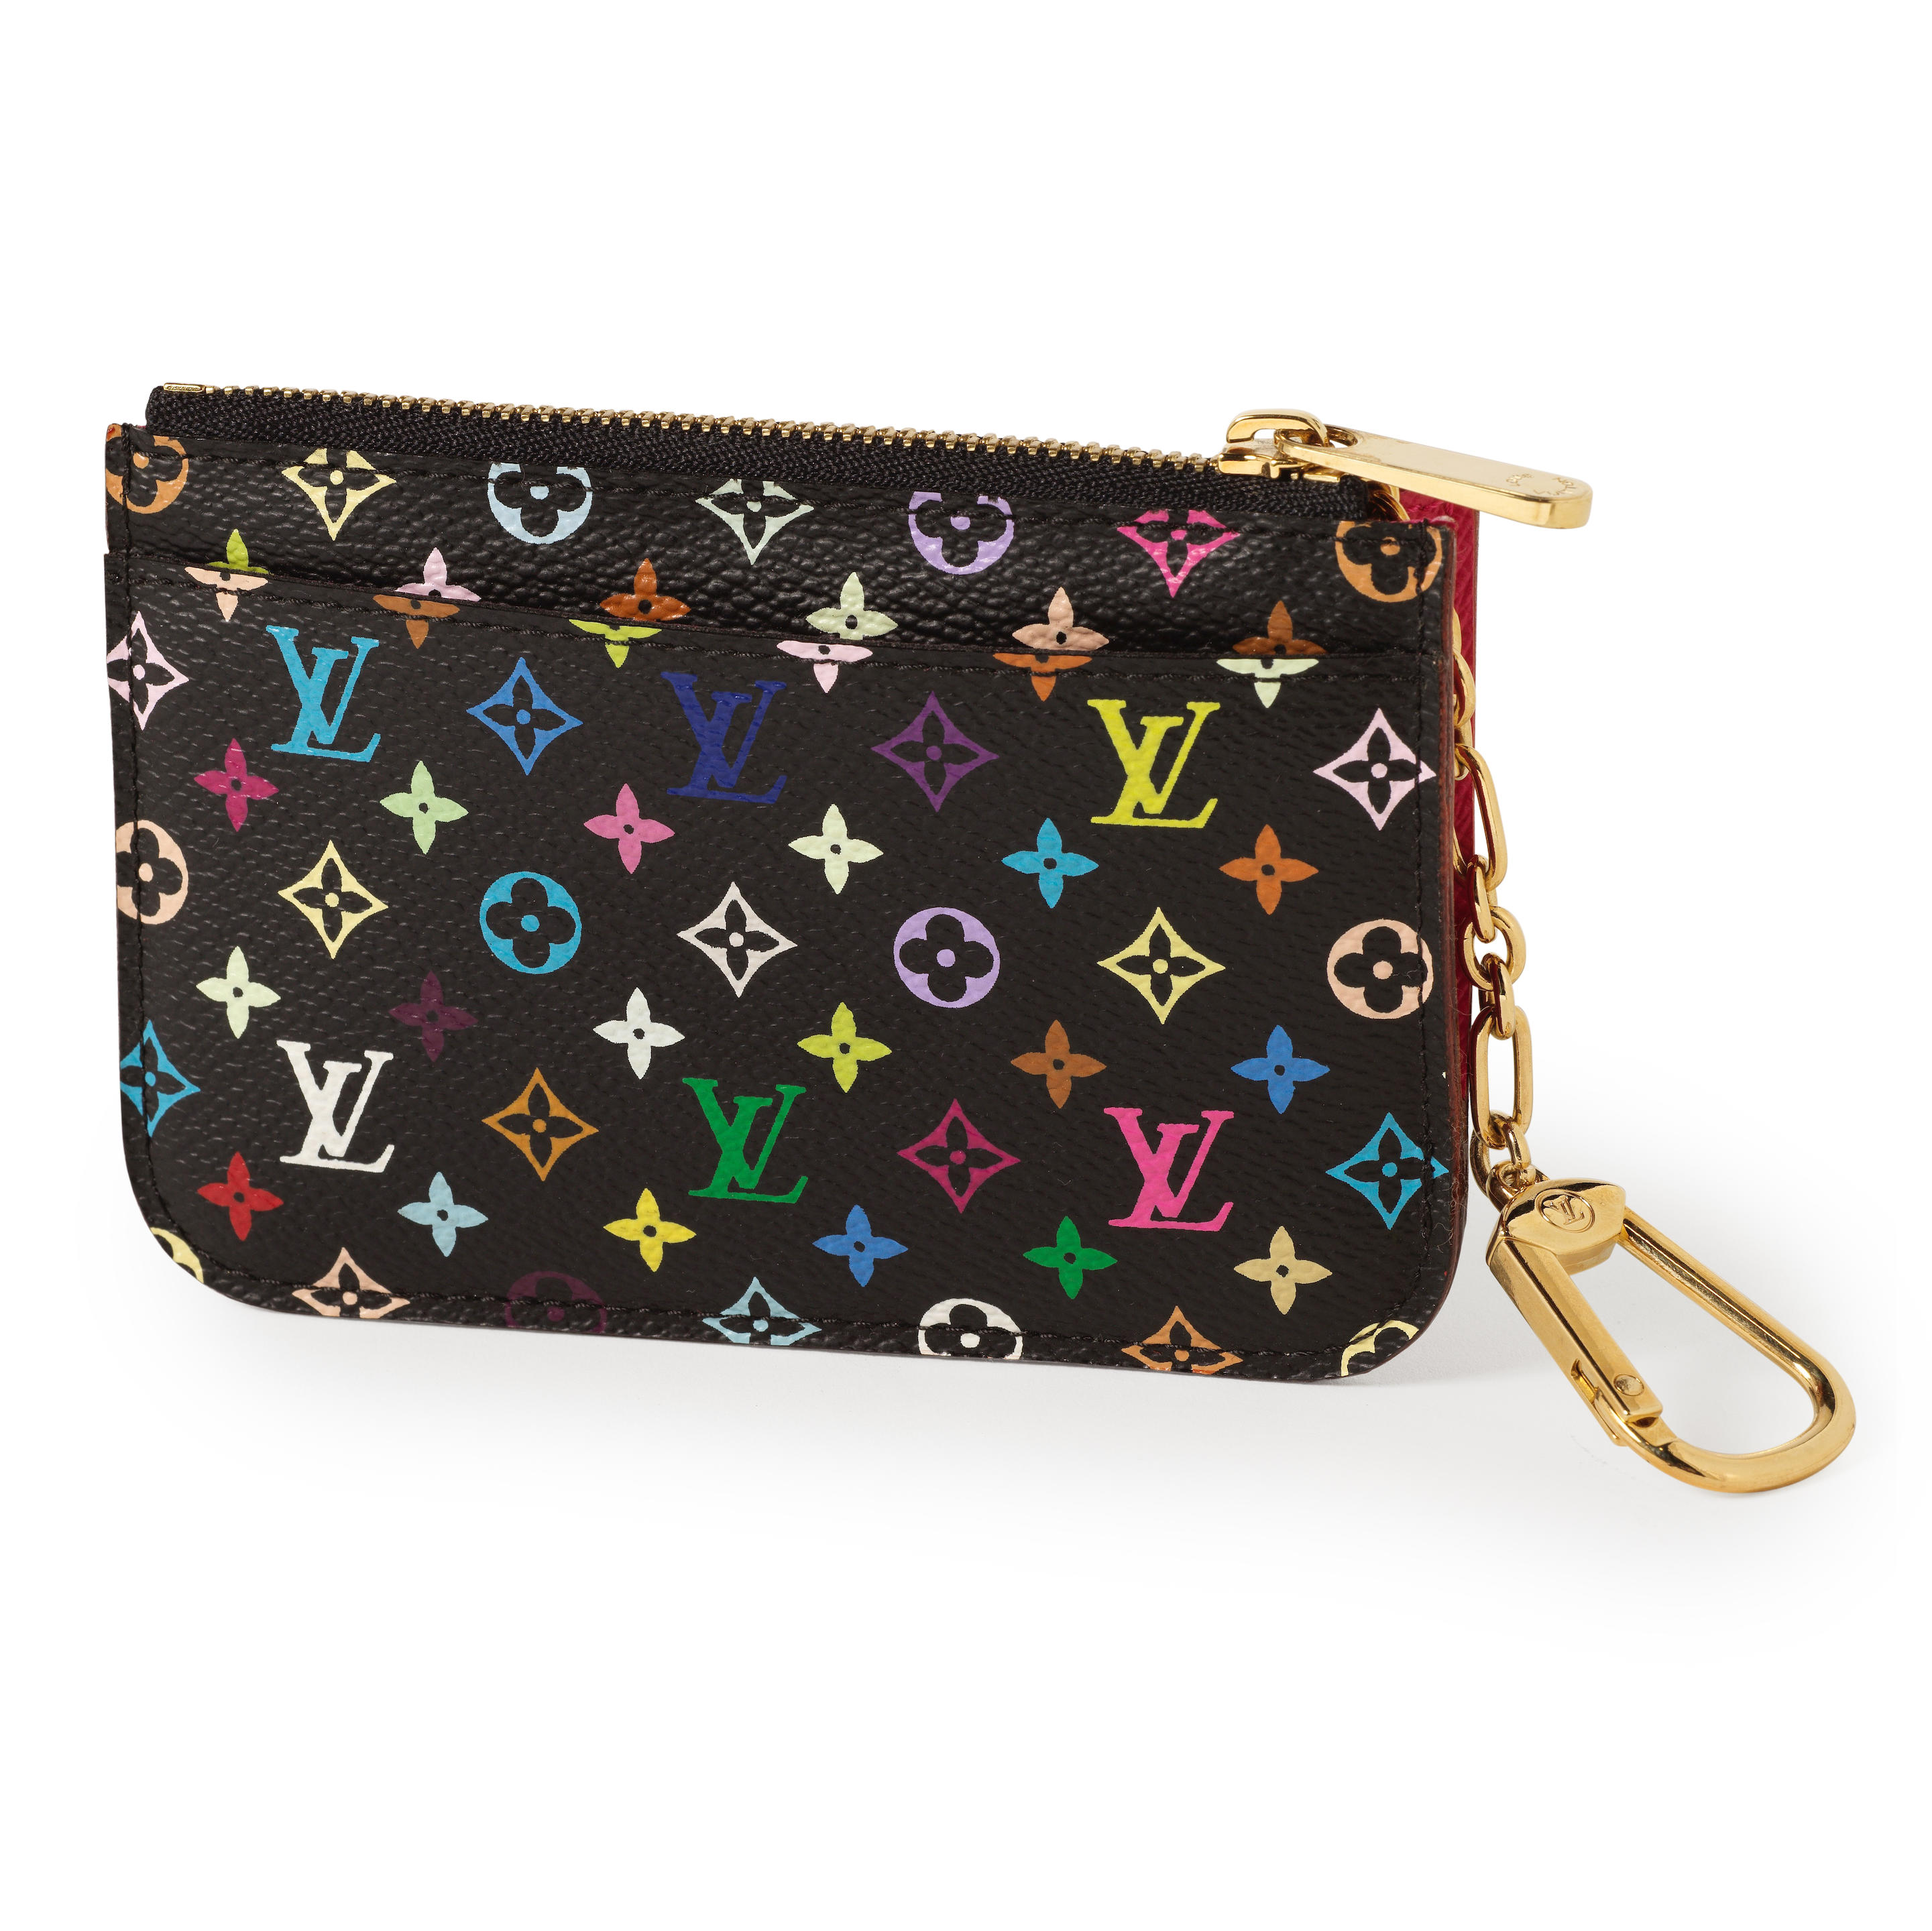 Sold at Auction: Louis Vuitton Monogram Eclipse/Taiga Leather